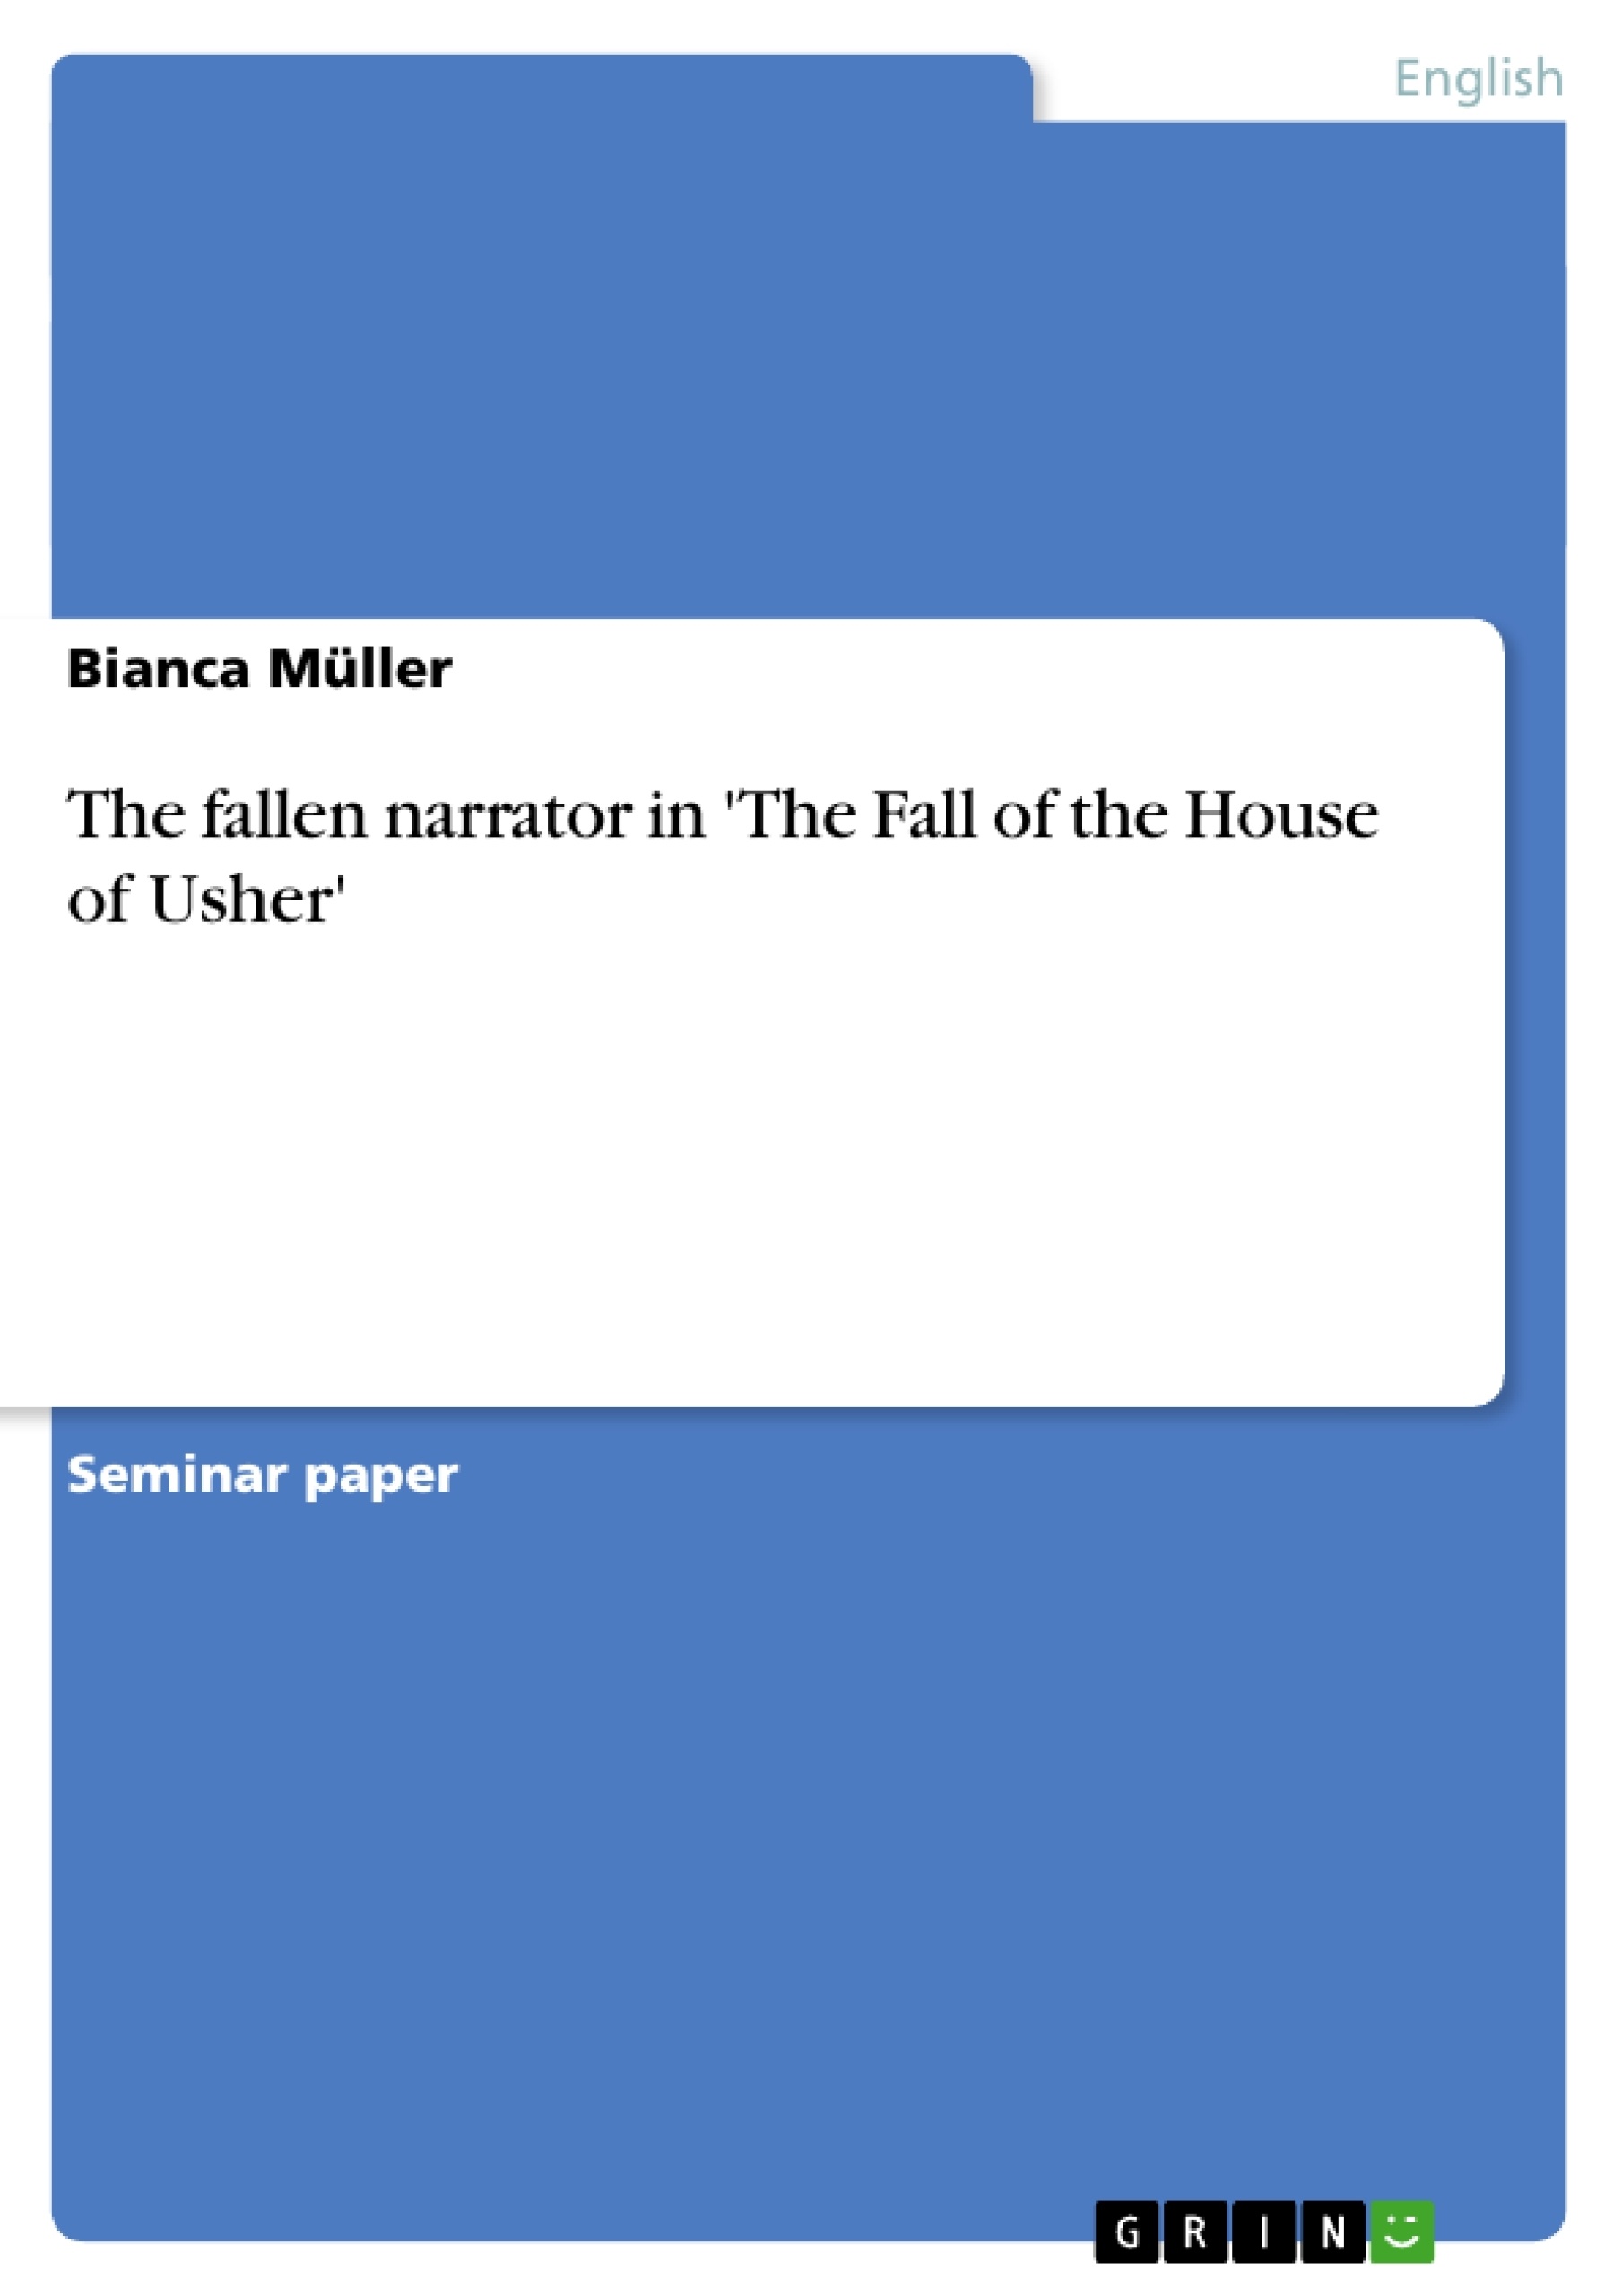 Titre: The fallen narrator in 'The Fall of the House of Usher'